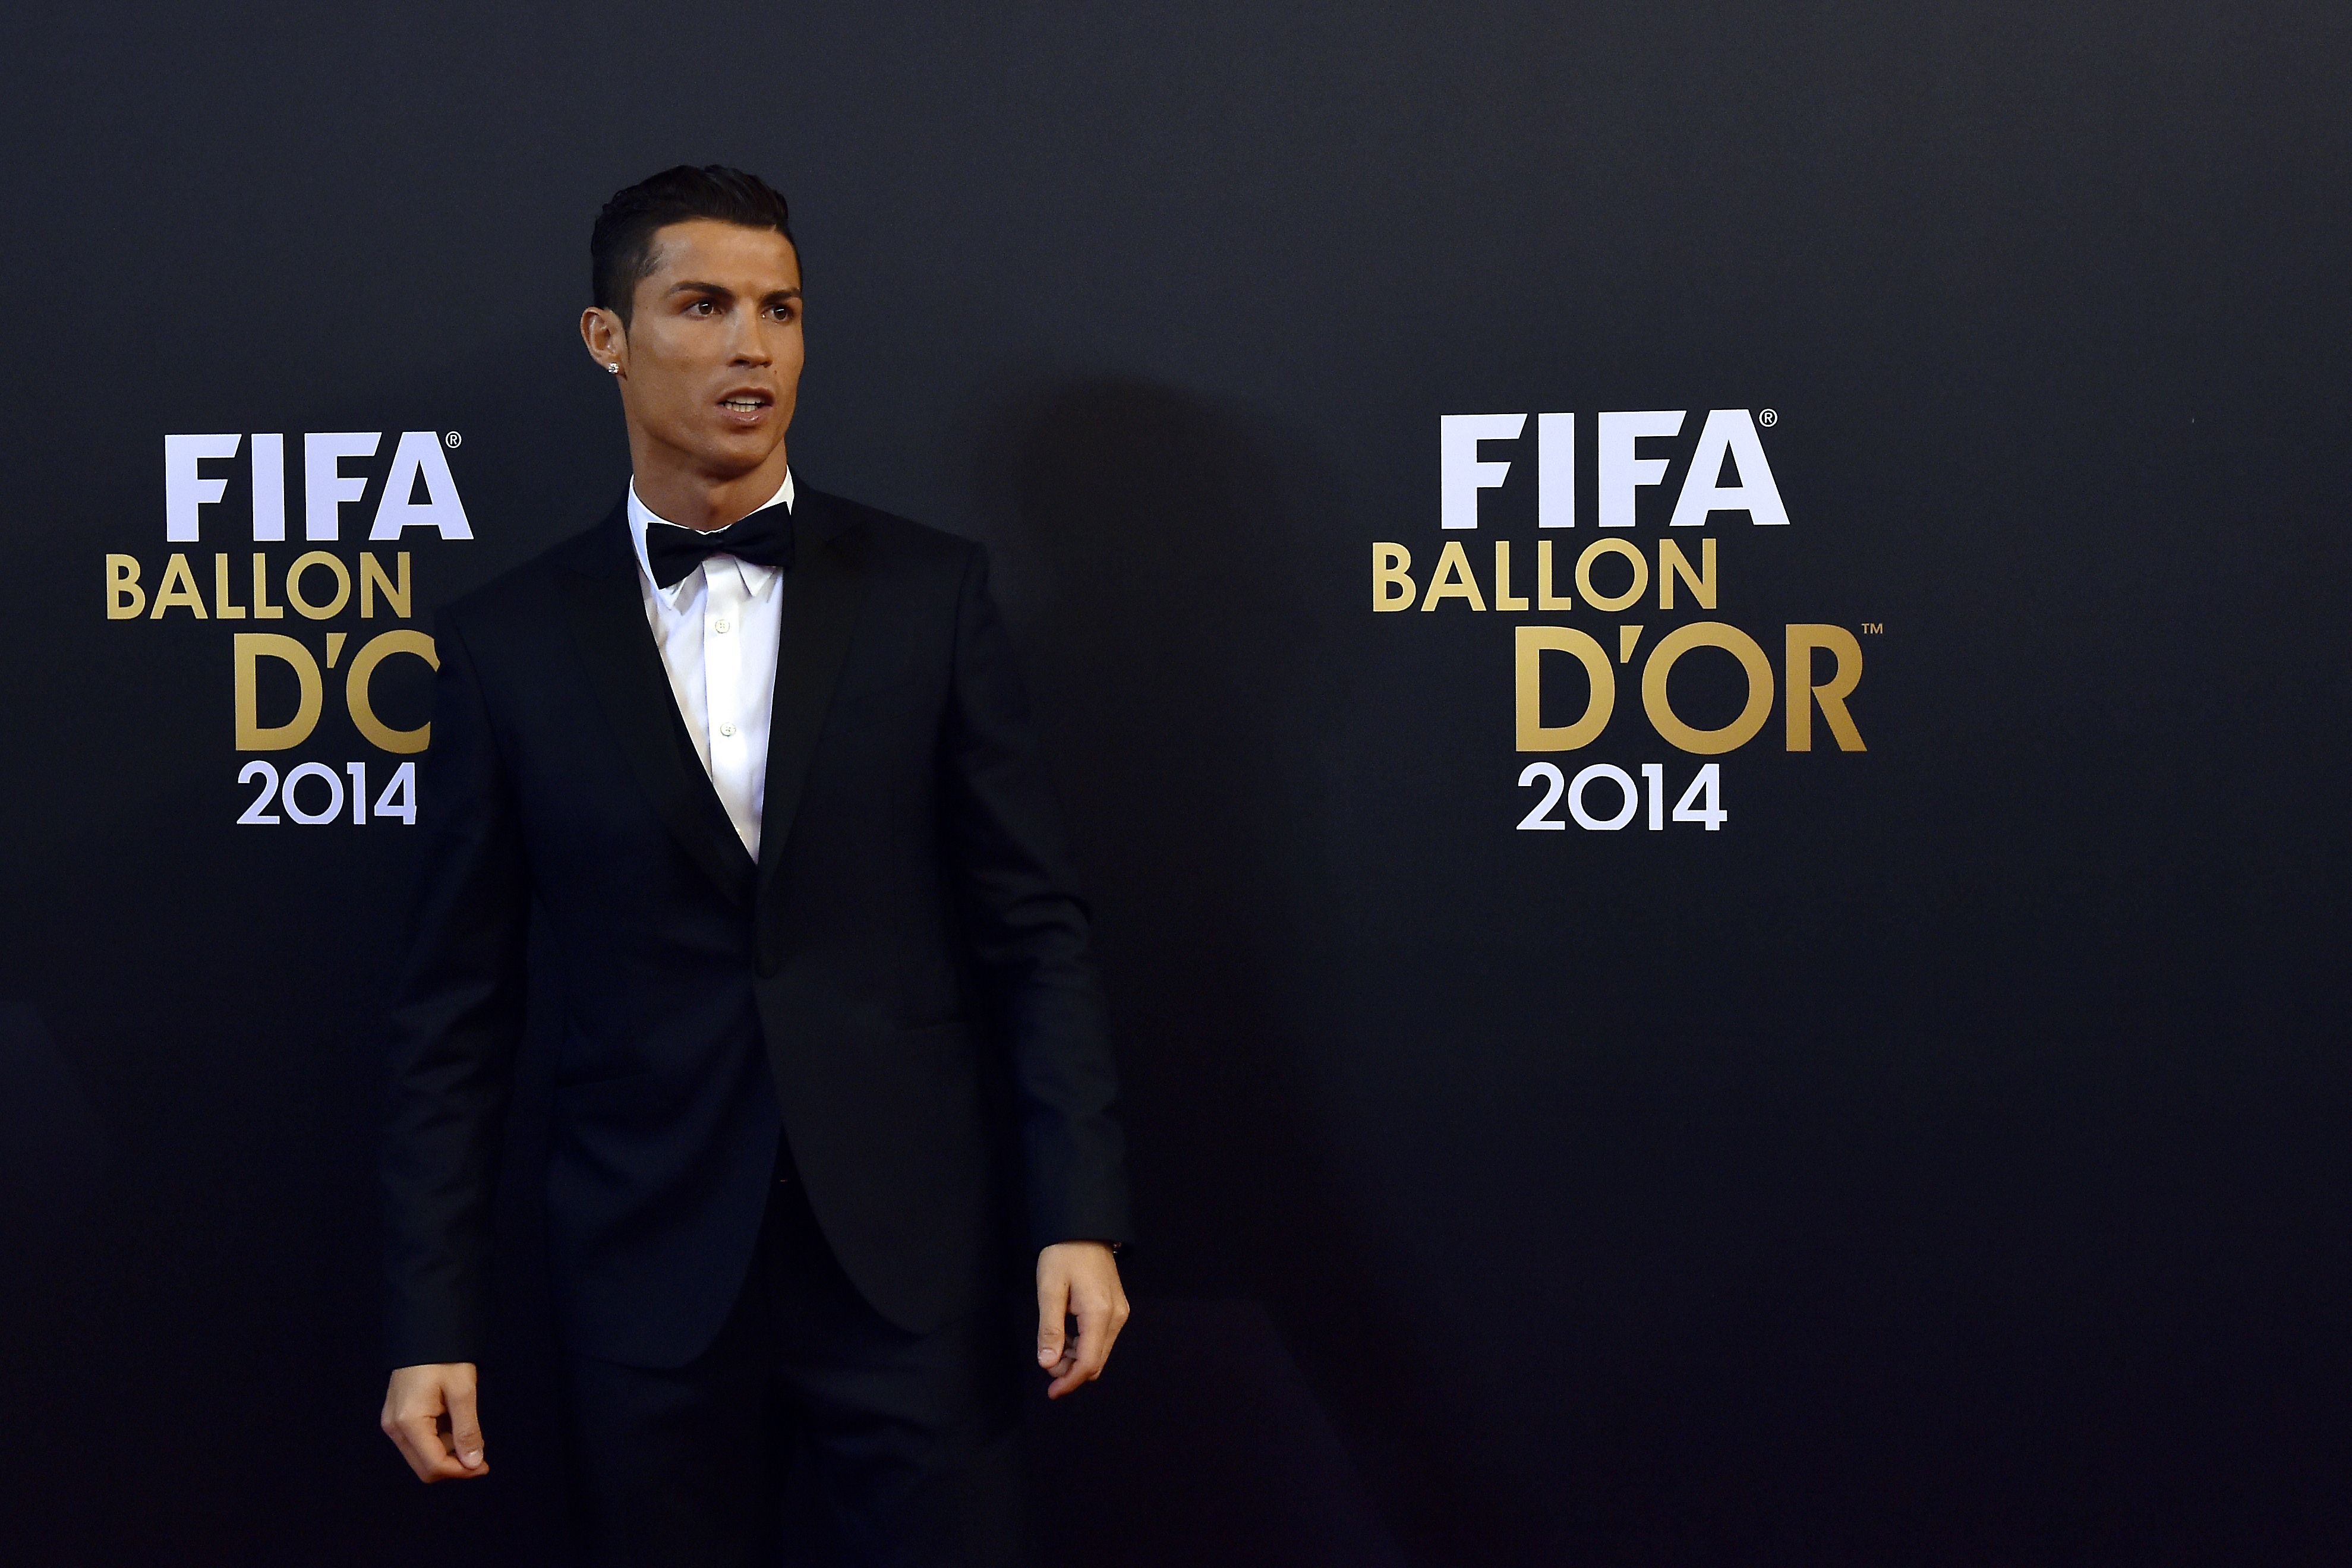 Real Madrid and Portugal forward Cristiano Ronaldo arrives during  the red carpet ceremony ahead of the 2014 FIFA Ballon d'Or award ceremony at the Kongresshaus in Zurich on Jan. 12, 2015 (Michael Buholzer—AFP/Getty Images)